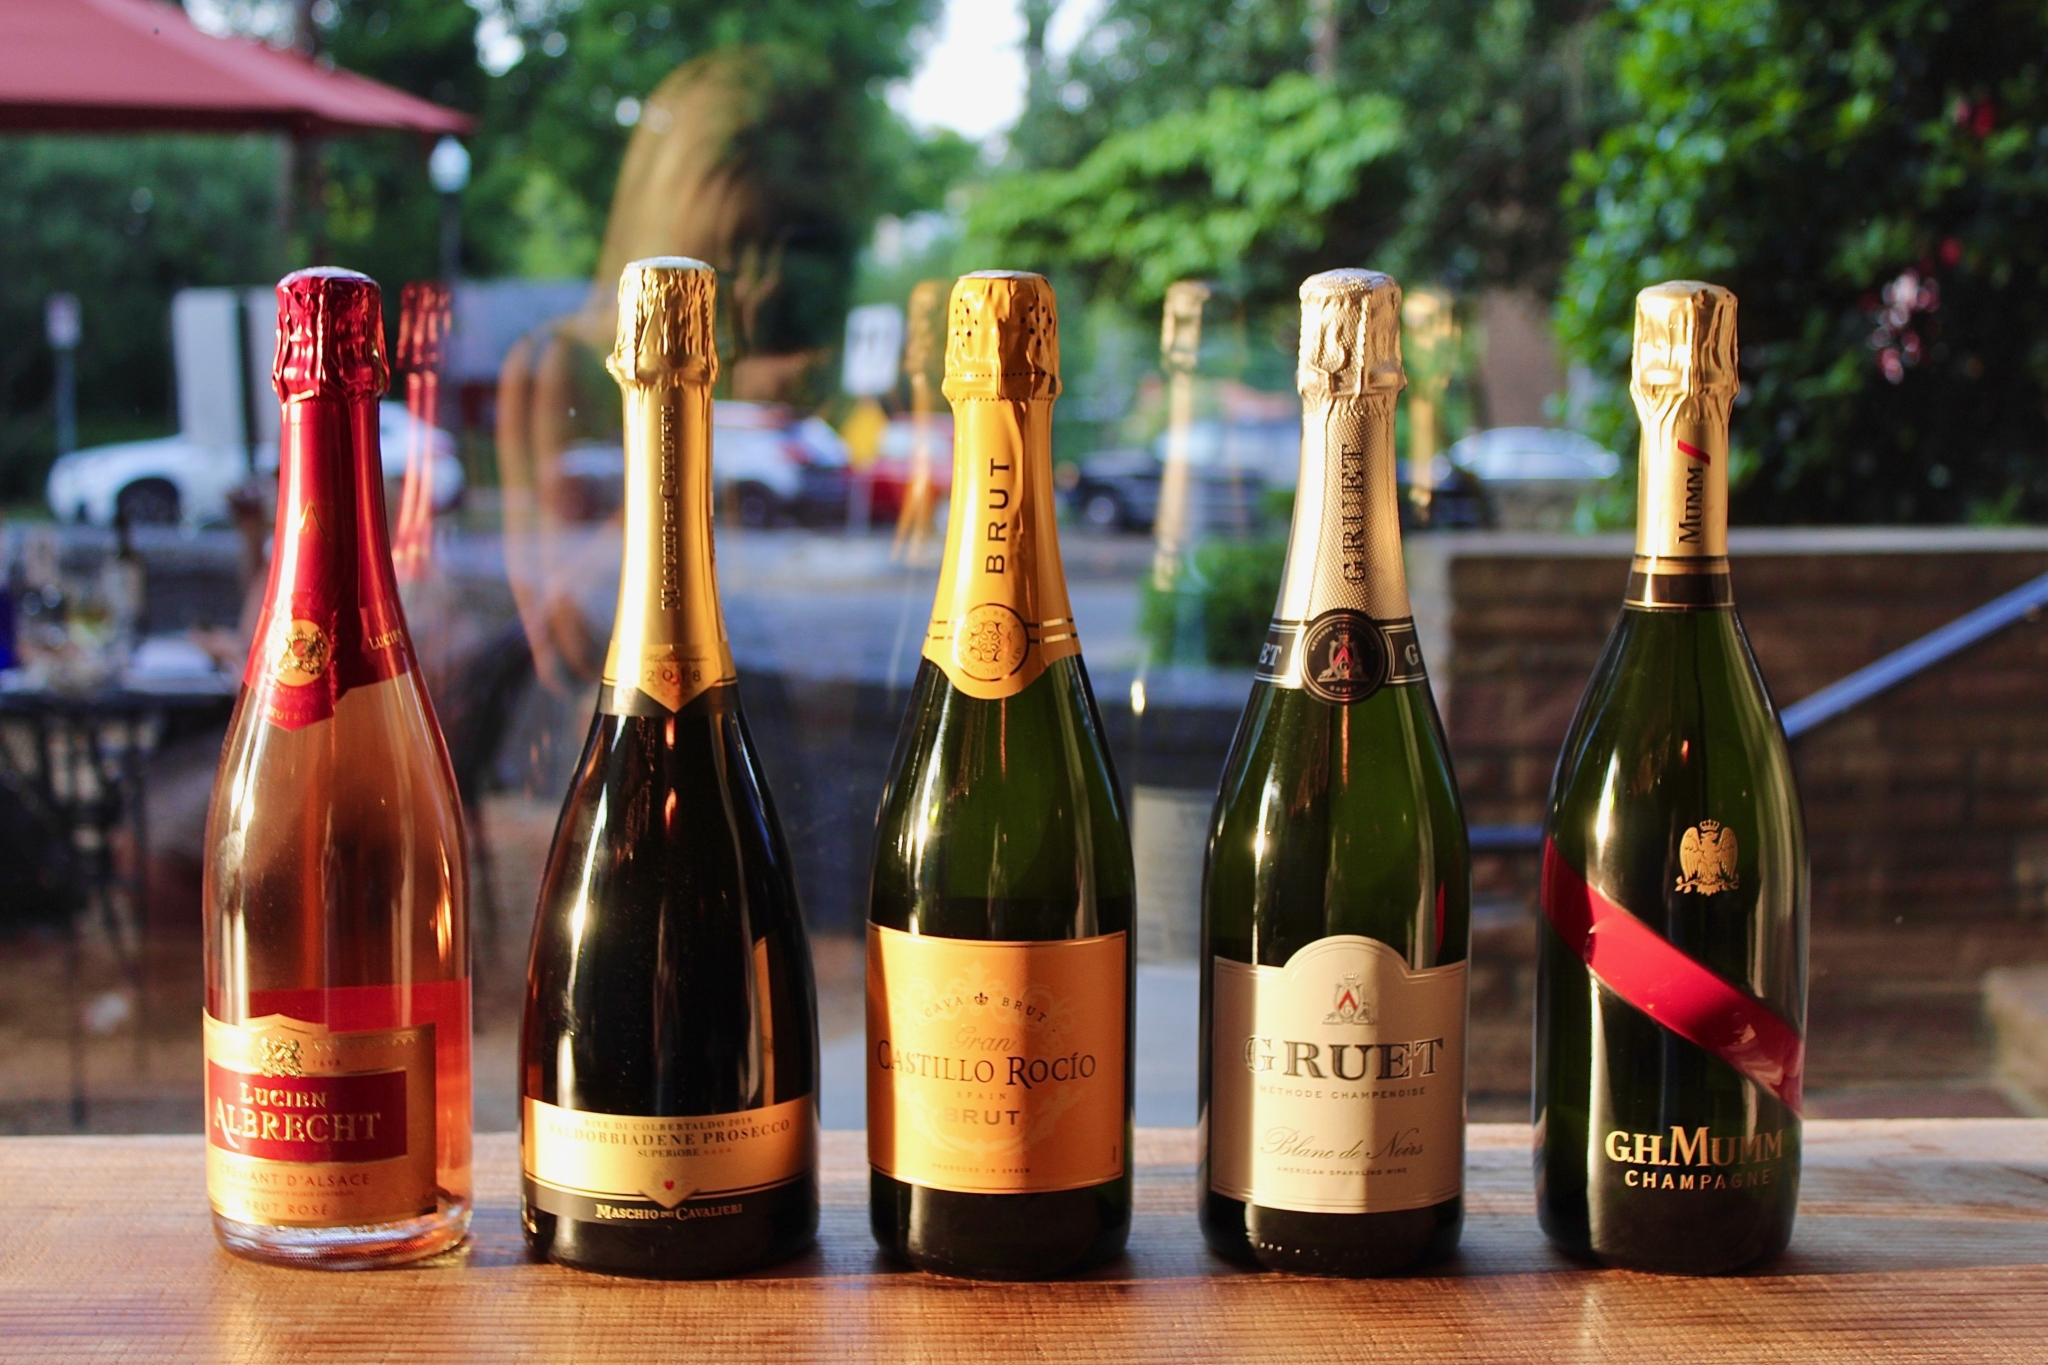 Wine and Champagne deals for national wine day